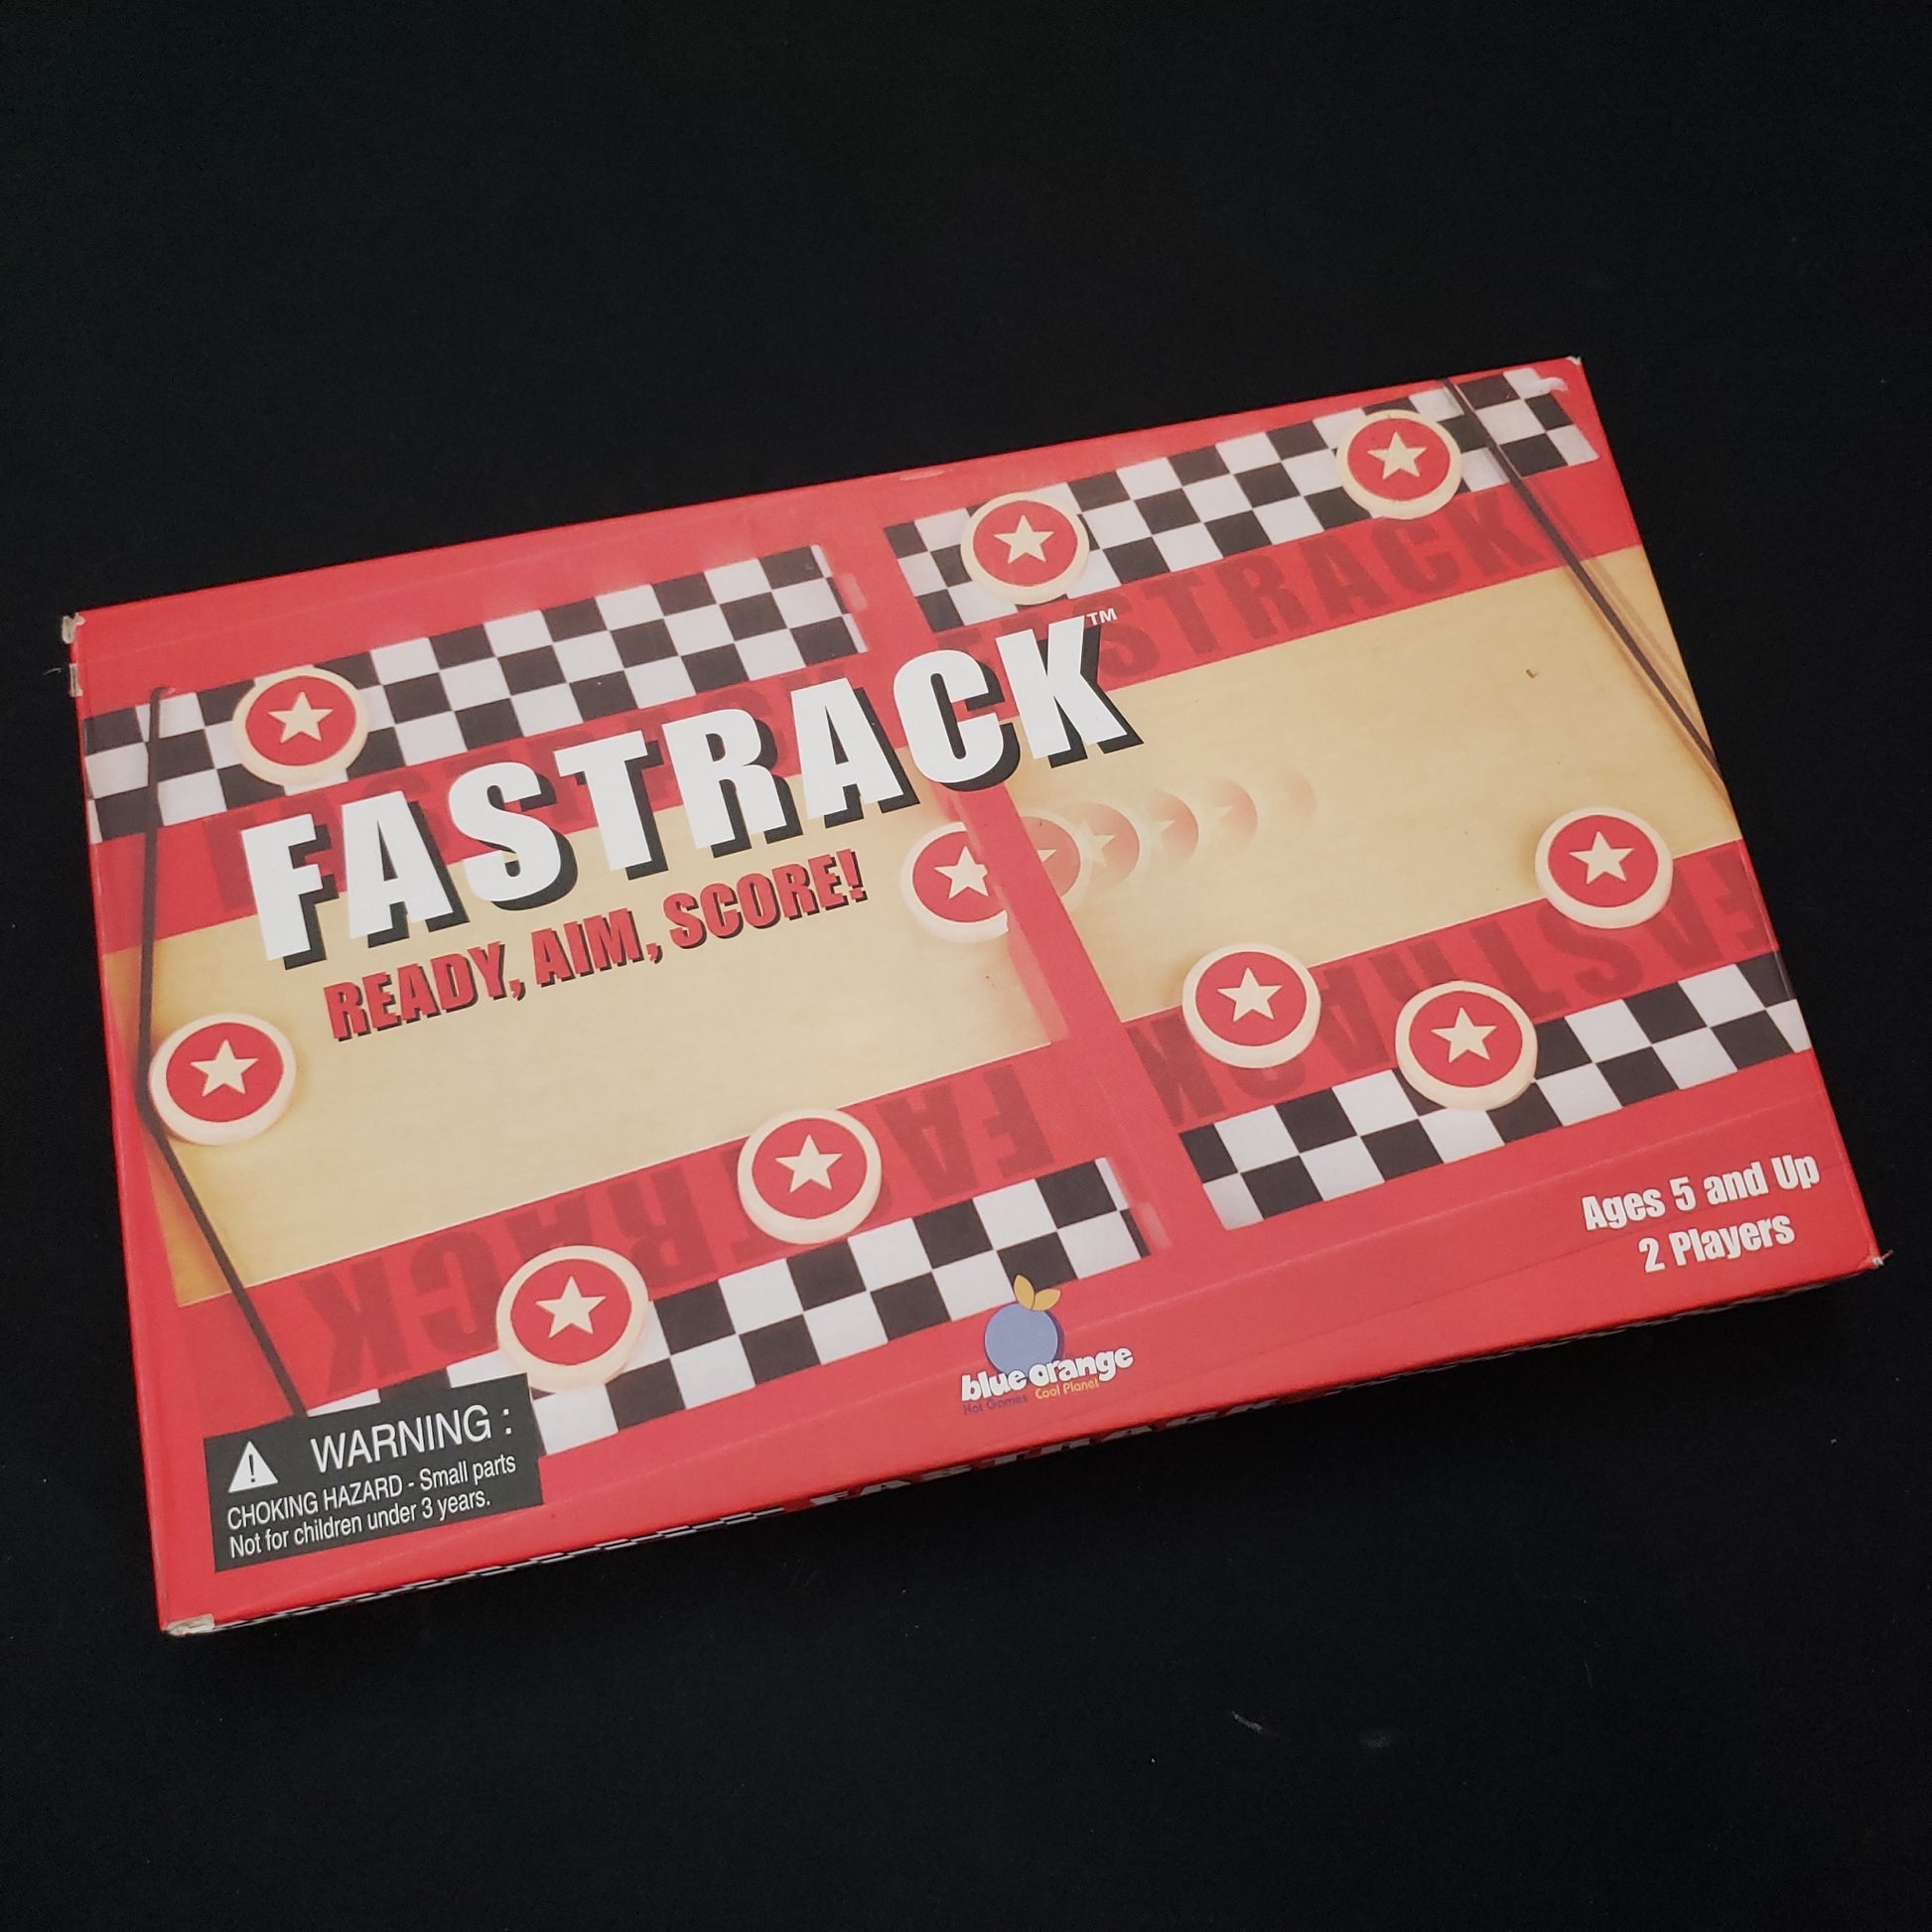 Image shows the front cover of the box of the Fastrack board game